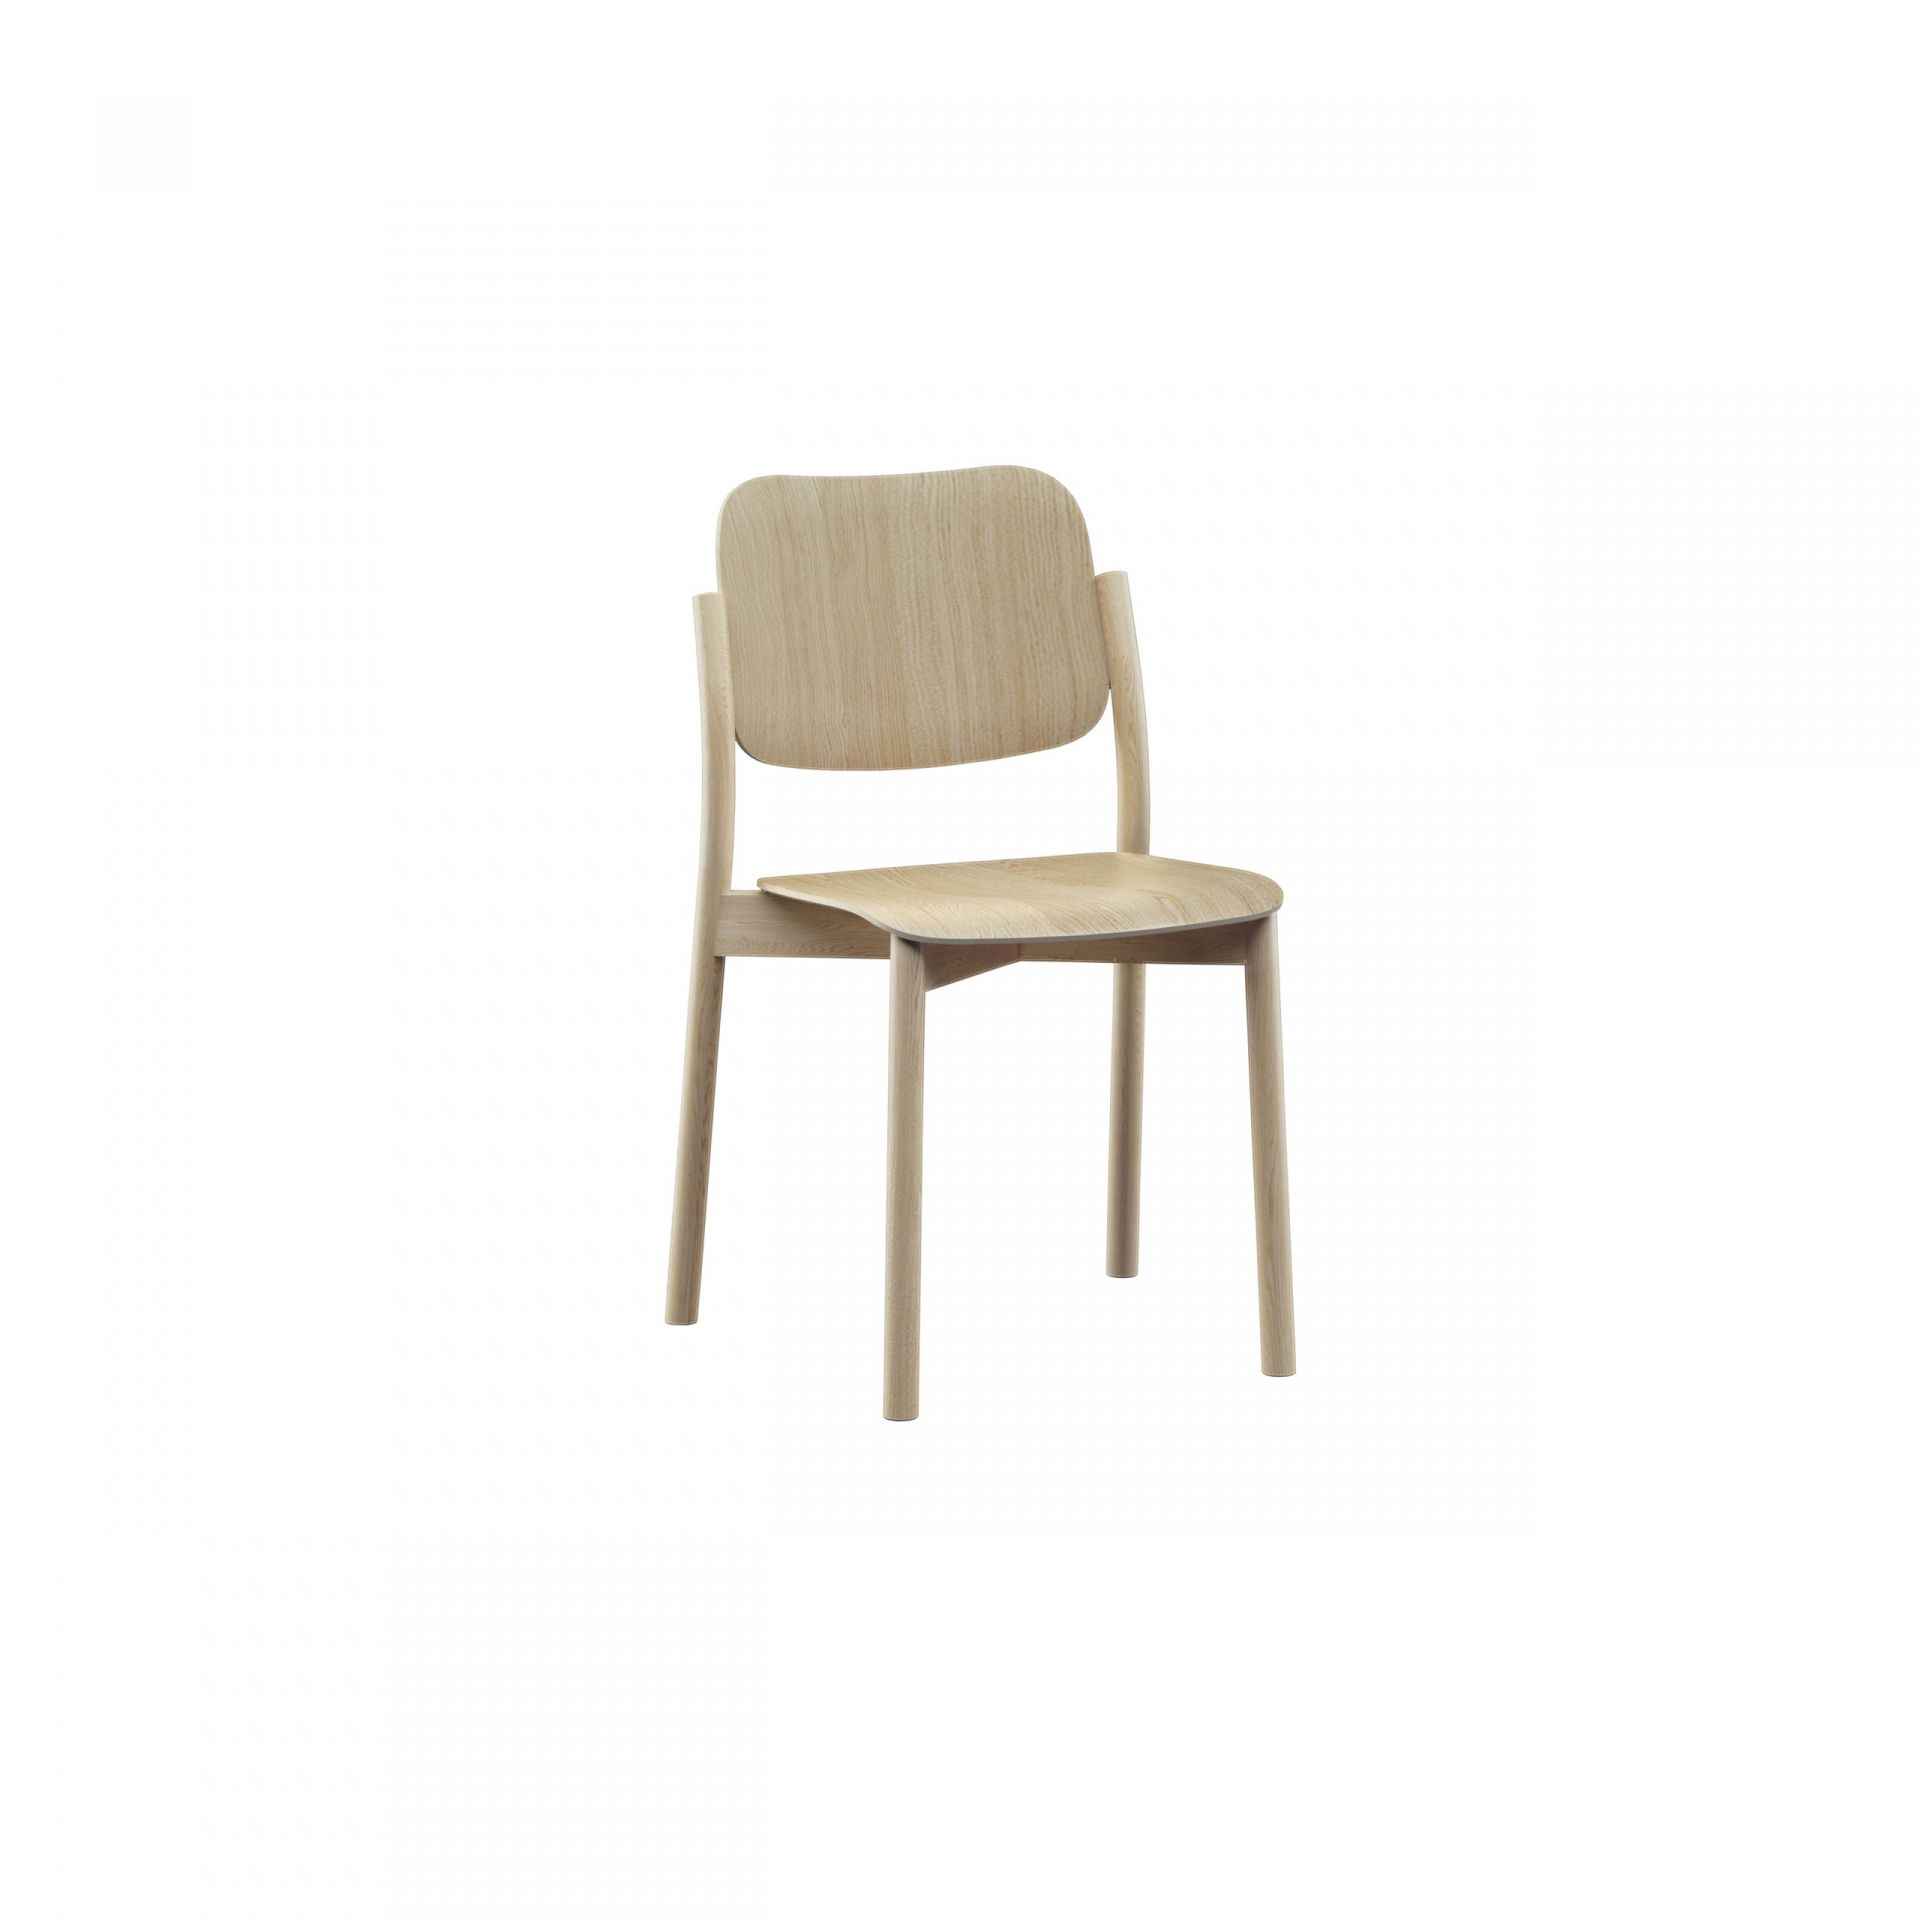 Zoe Wooden chair product image 10